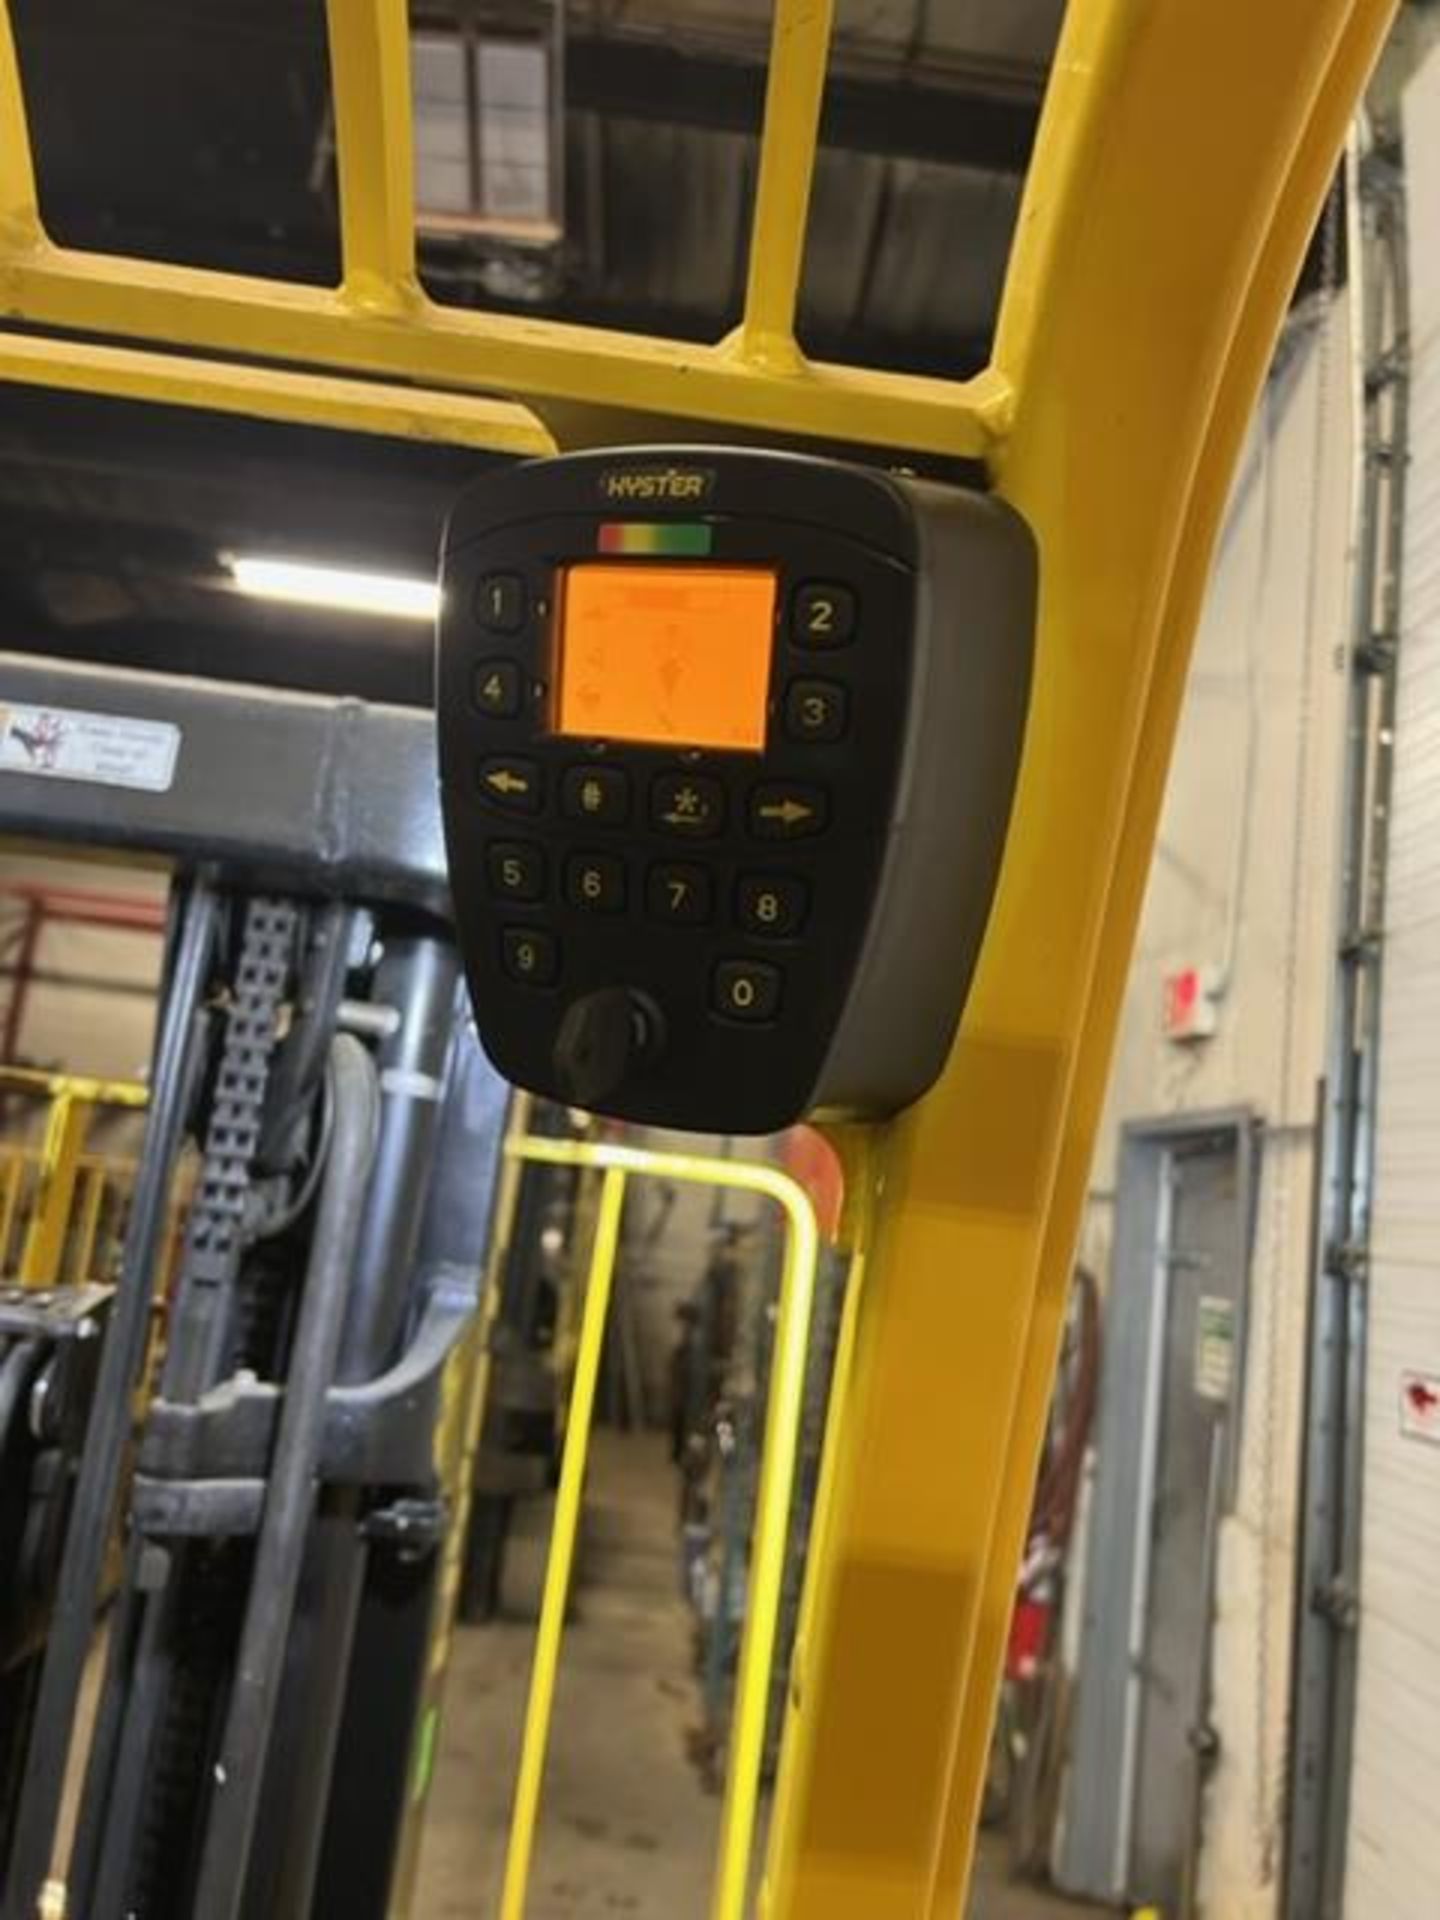 FREE CUSTOMS - MINT LIKE NEW 2015 Hyster model 50 - 5,000lbs Capacity Indoor Outdoor Forklift - Image 4 of 4